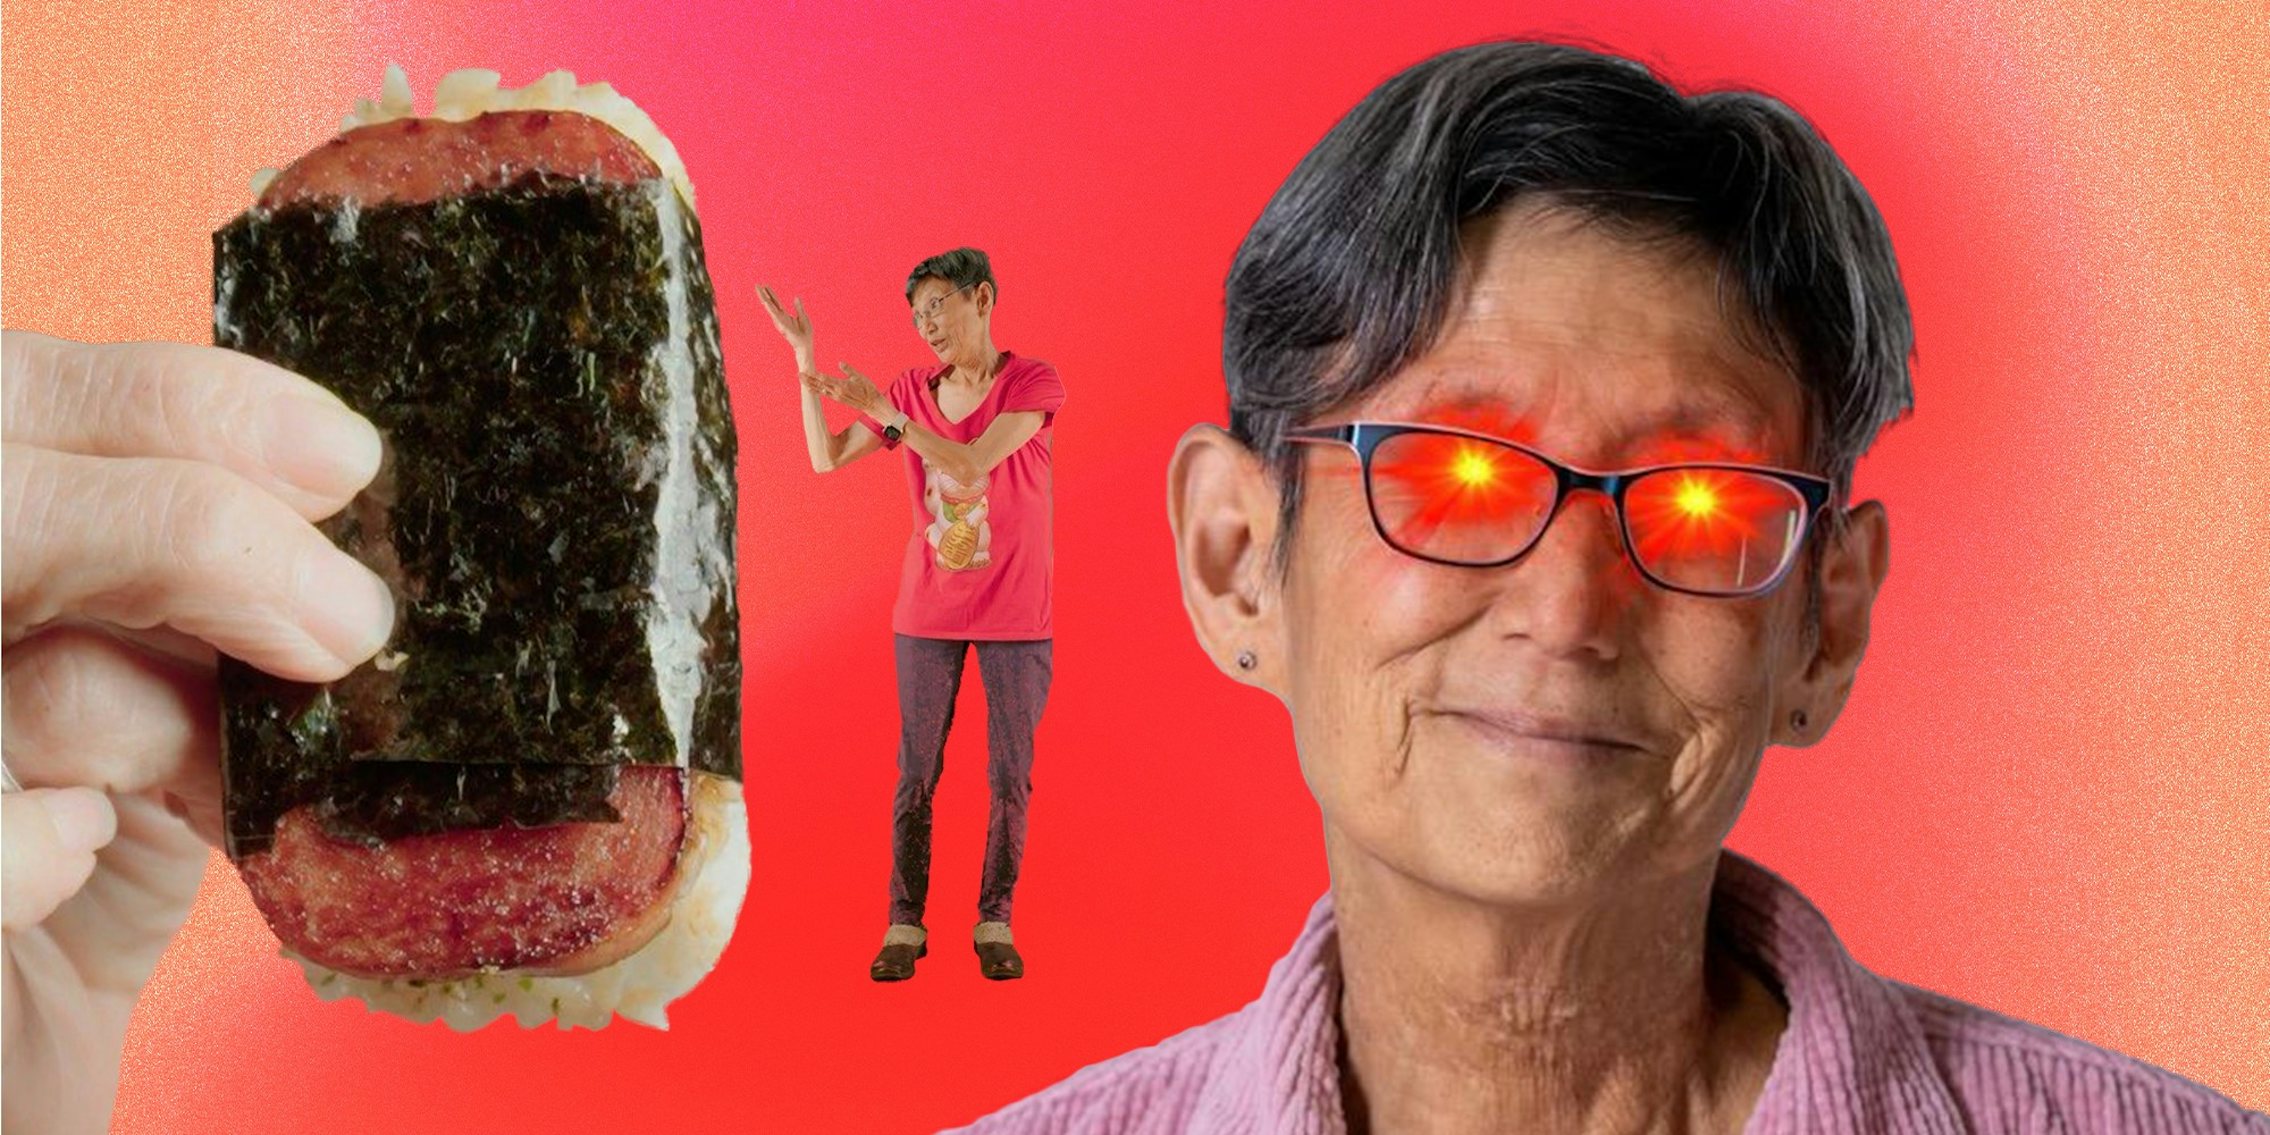 Spam musubi, a woman, and a woman with red laser eyes